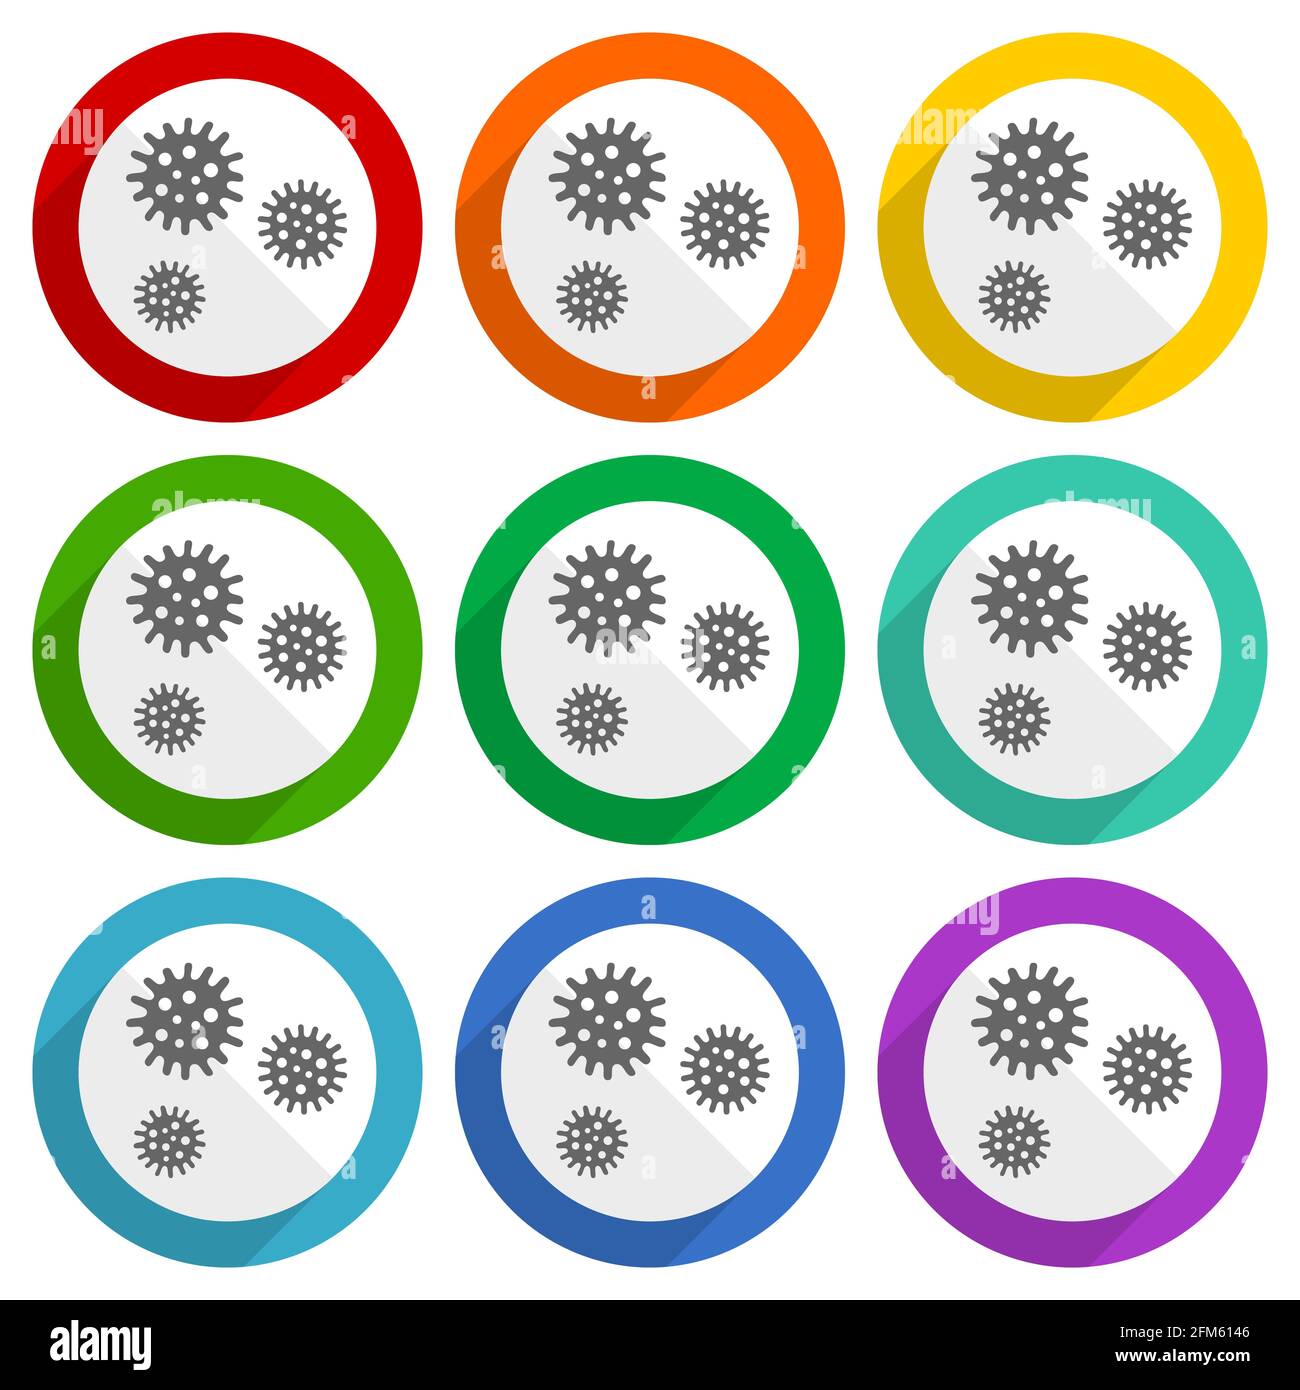 Virus, coronavirus, covid-19, infection vector icons, set of colorful flat design buttons for webdesign and mobile applications Stock Vector